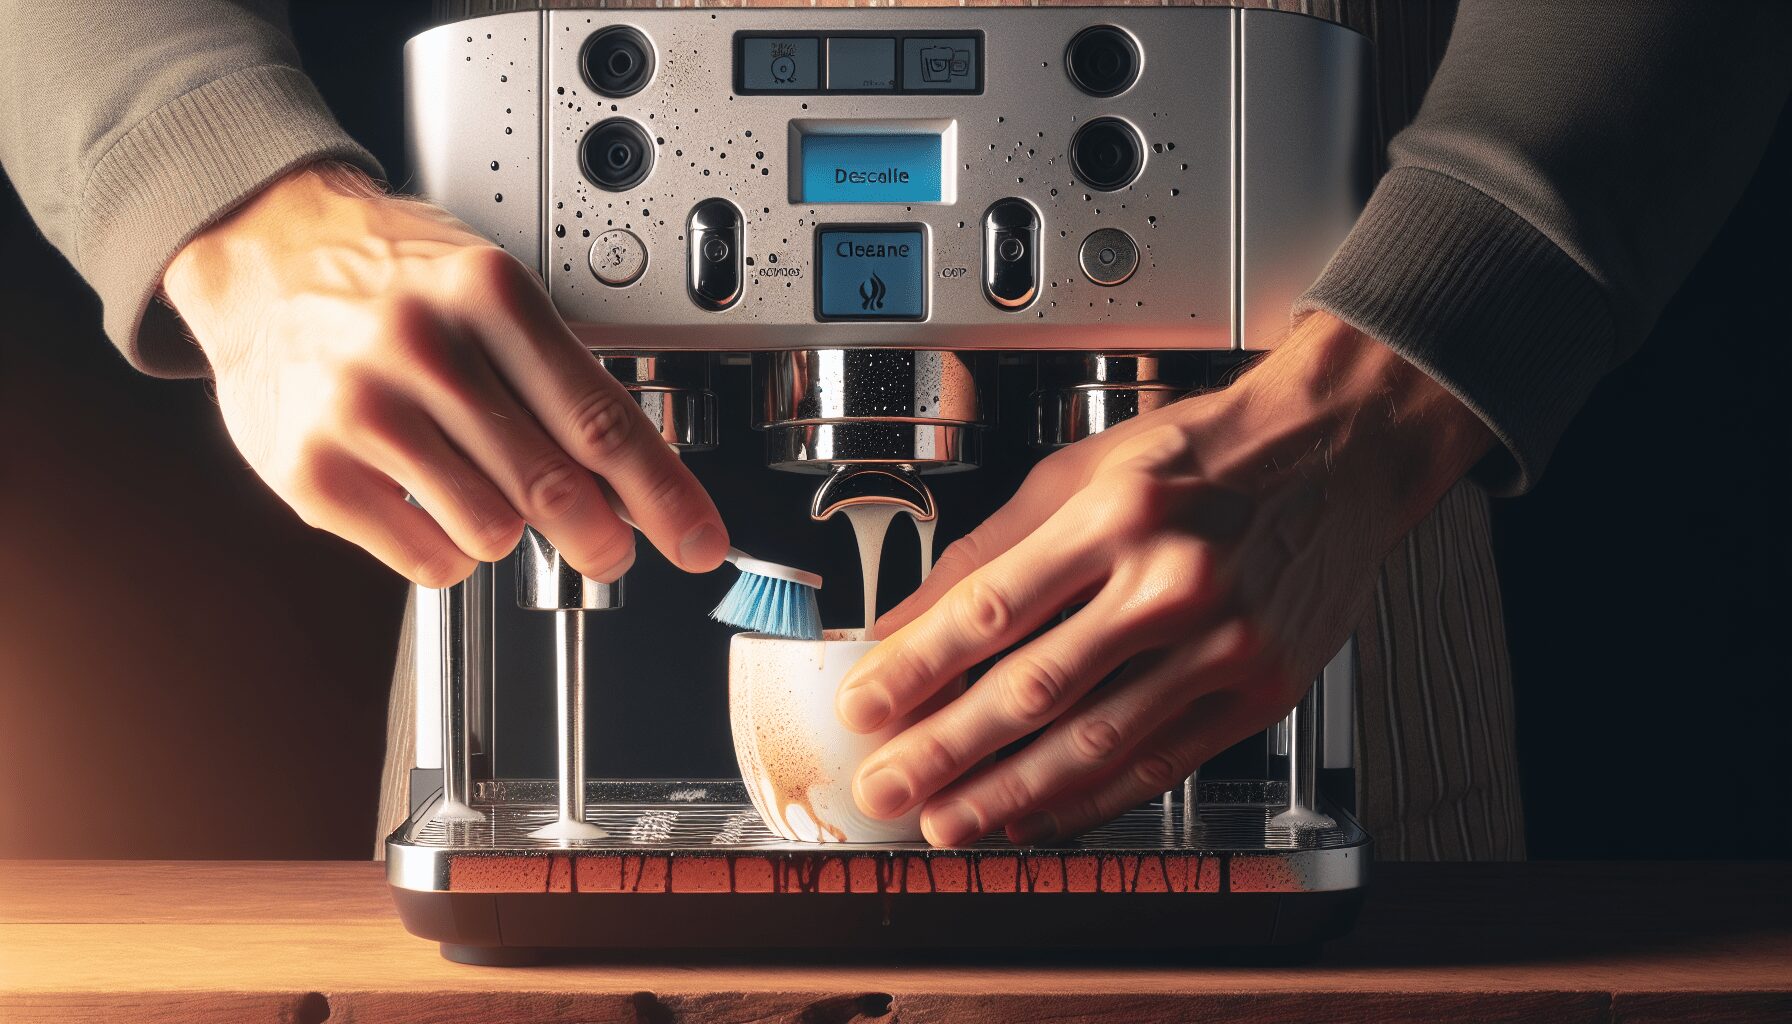 The Ultimate Guide to Descaling Your Nespresso Machine